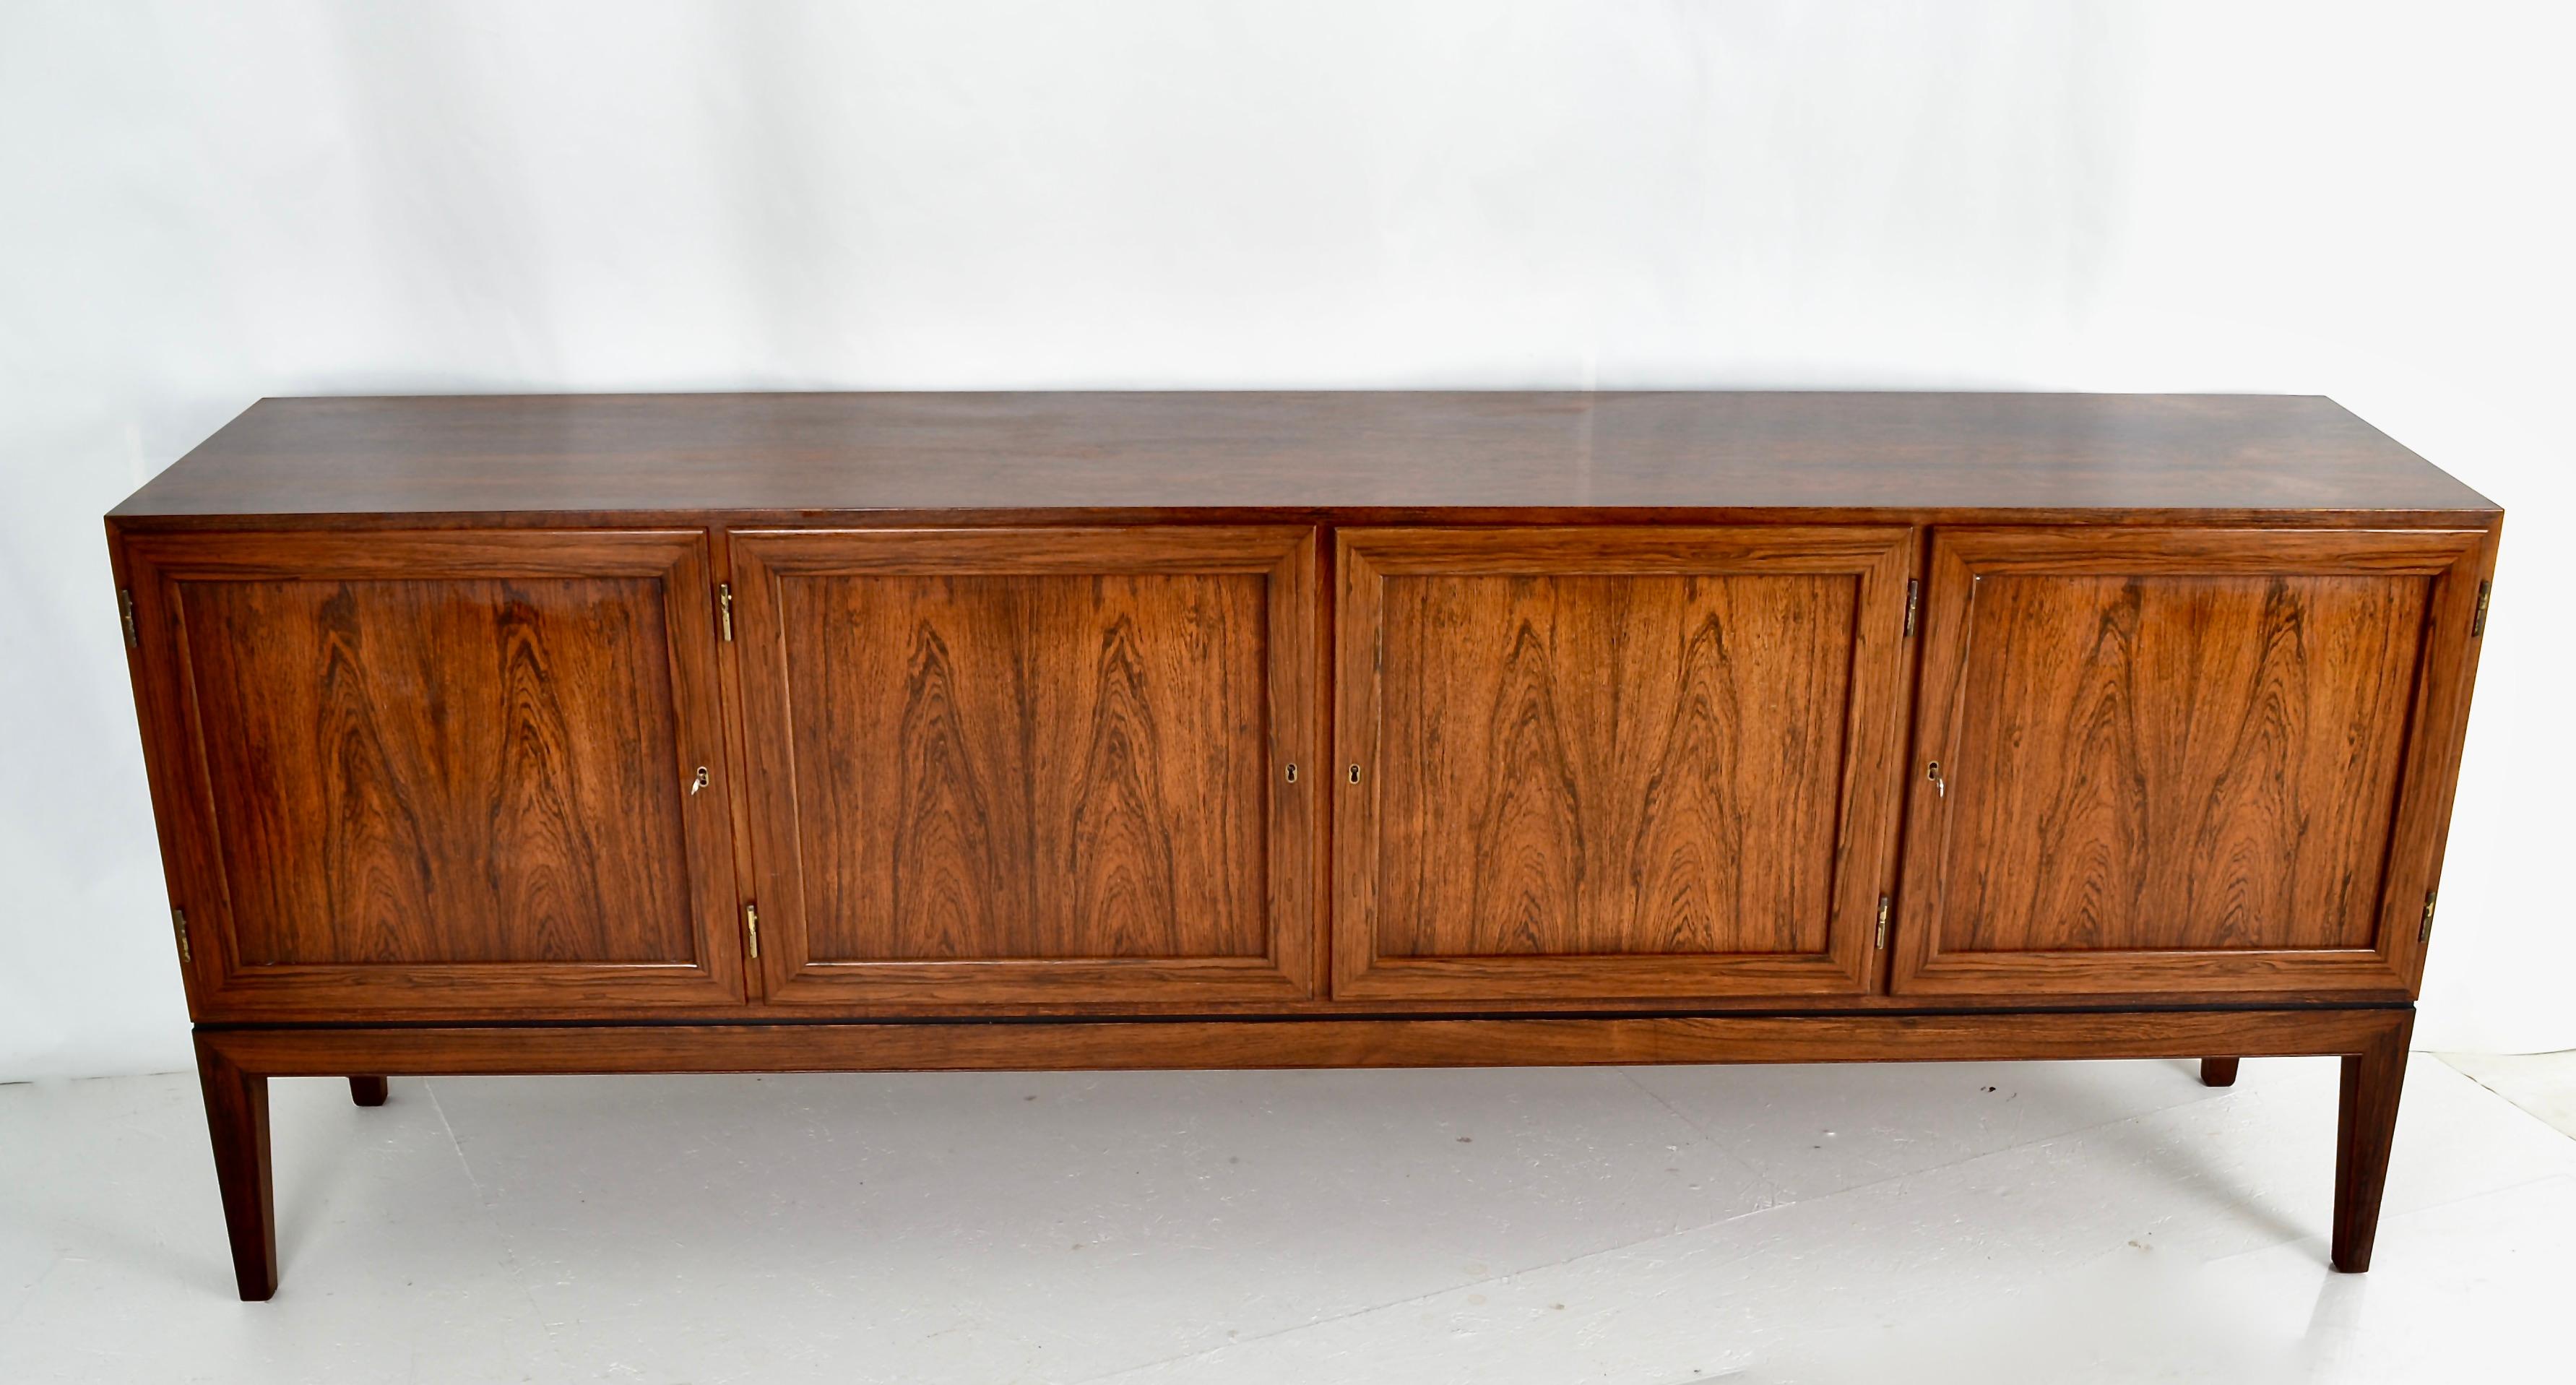 Figured rosewood with a rich finish makes this sideboard a stand-out. Classic Danish modern design with tapered legs and four paneled doors. Felt-lined silverware drawers on left. Shelves in center and right.